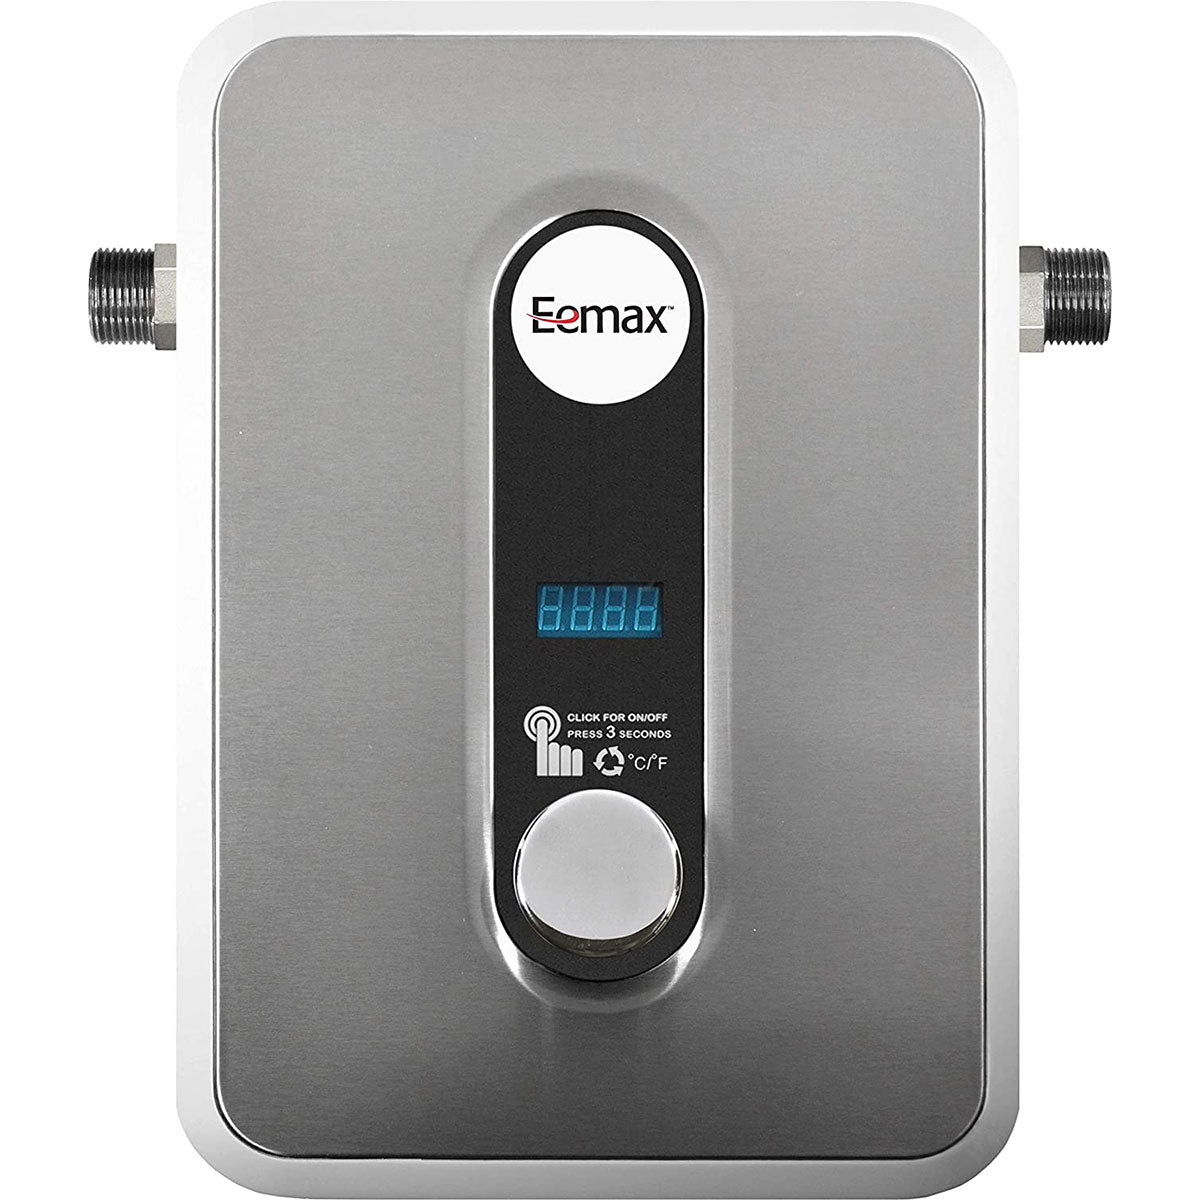 Eemax HomeAdvantage II 8kW 240V Electric Tankless Water Heater